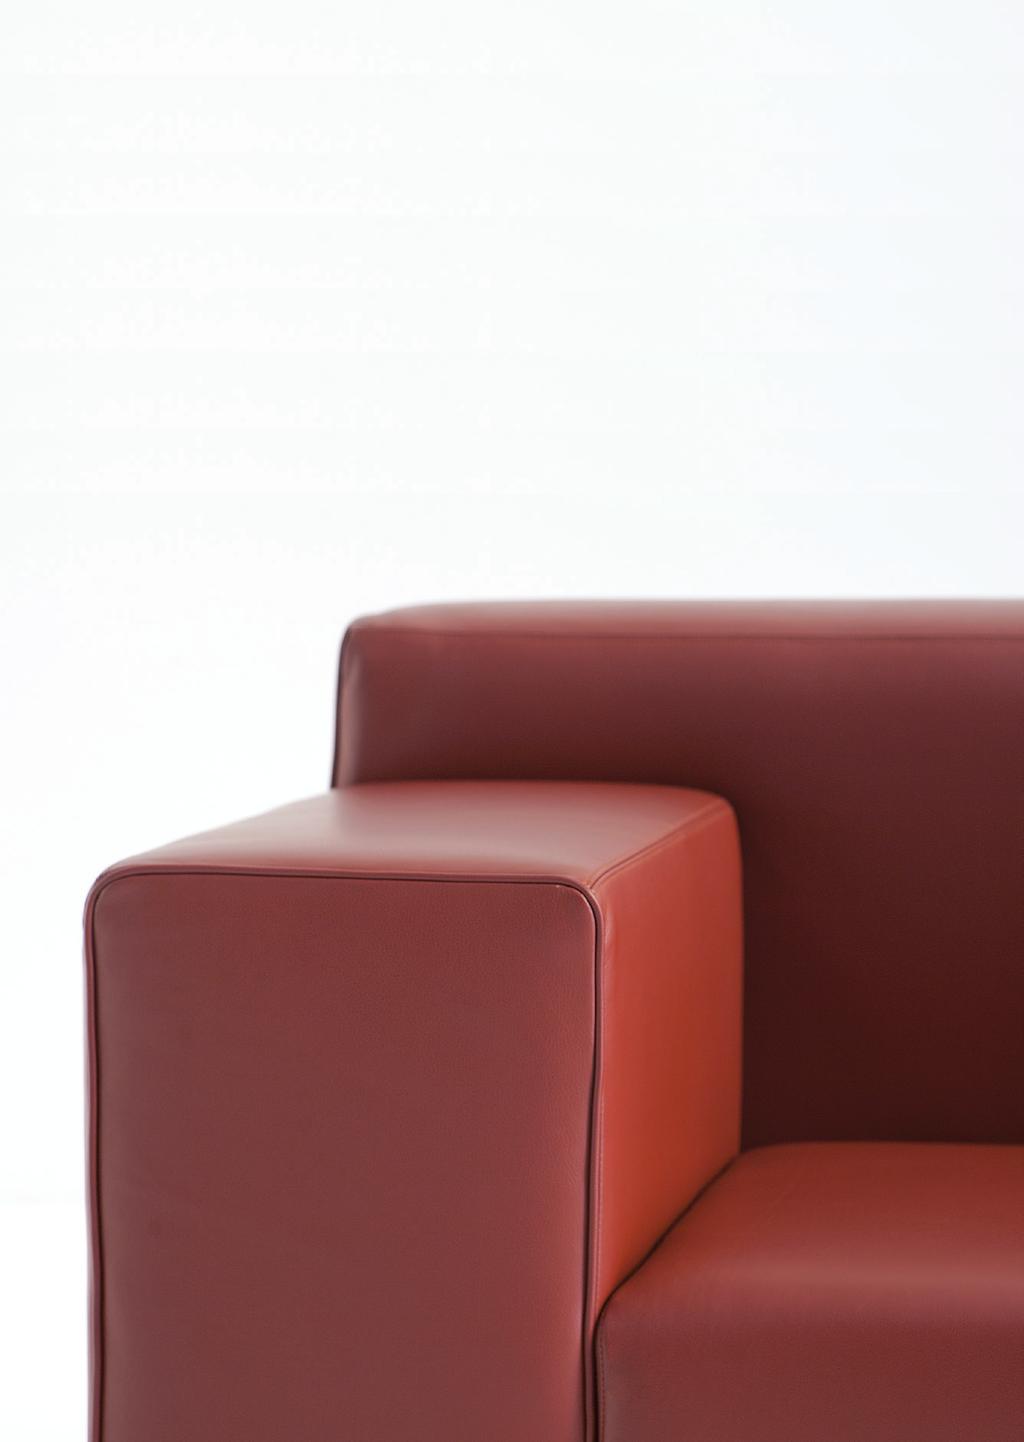 867 Cubo The Cubo collection stands out for the simplicity of its design, characterised by straight lines and solid bulk of the various components that make up the seats.